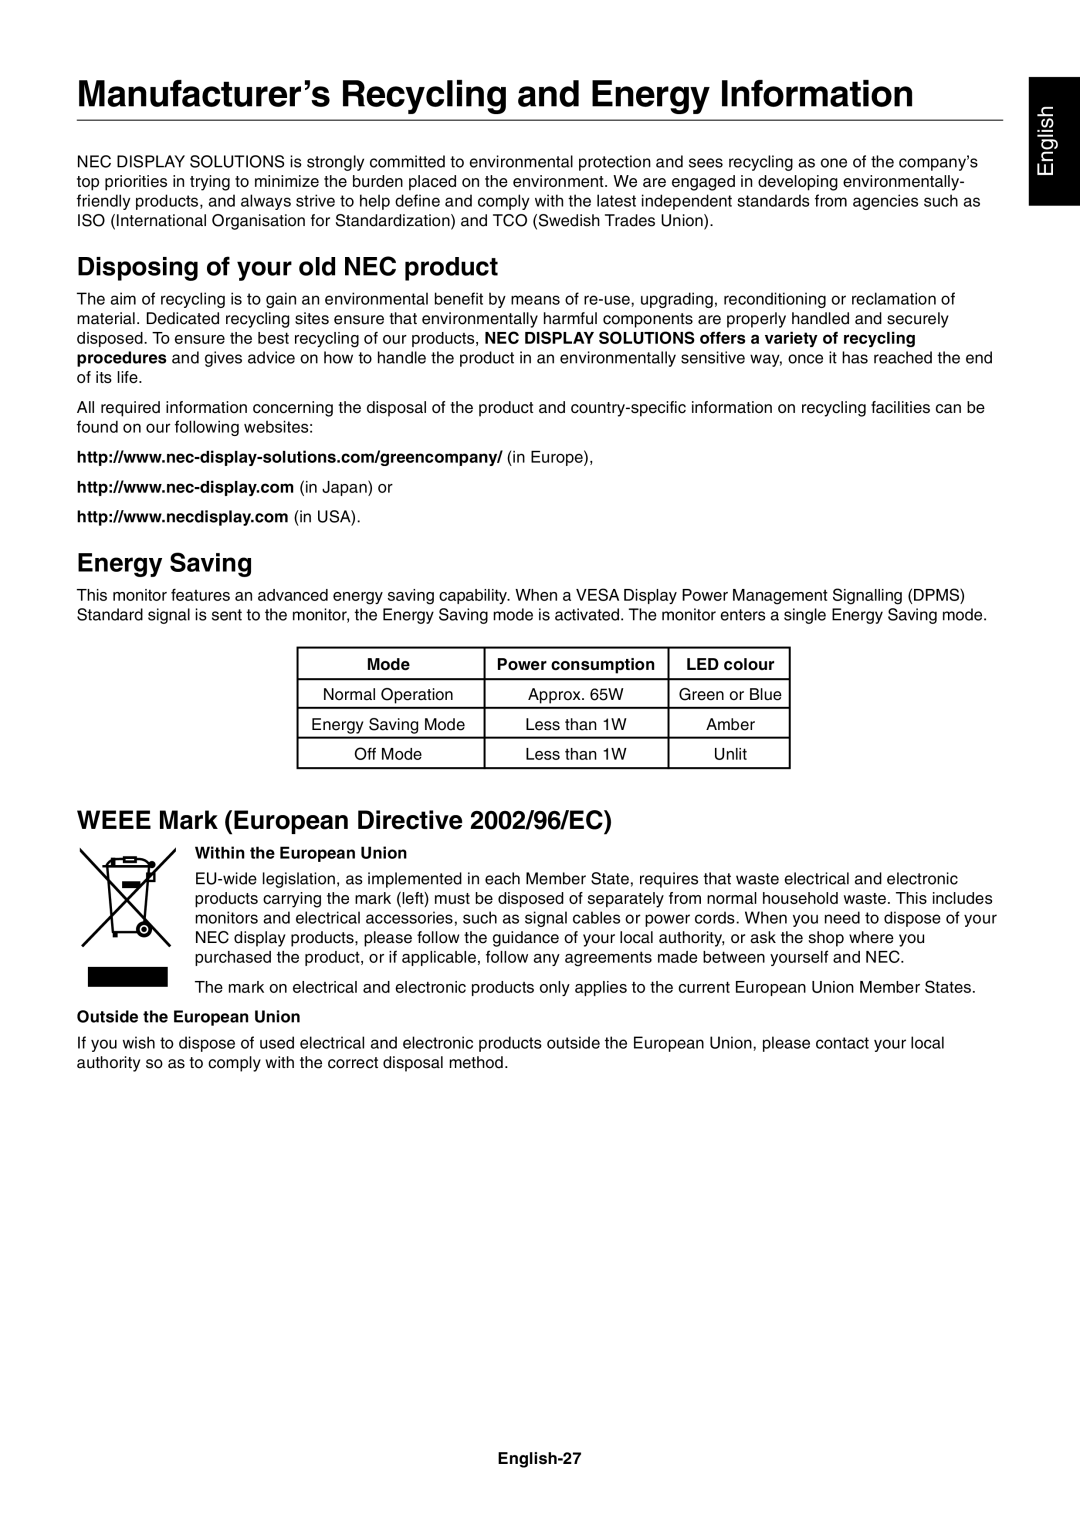 NEC 2690 Manufacturer’s Recycling and Energy Information, Disposing of your old NEC product, Energy Saving, English 